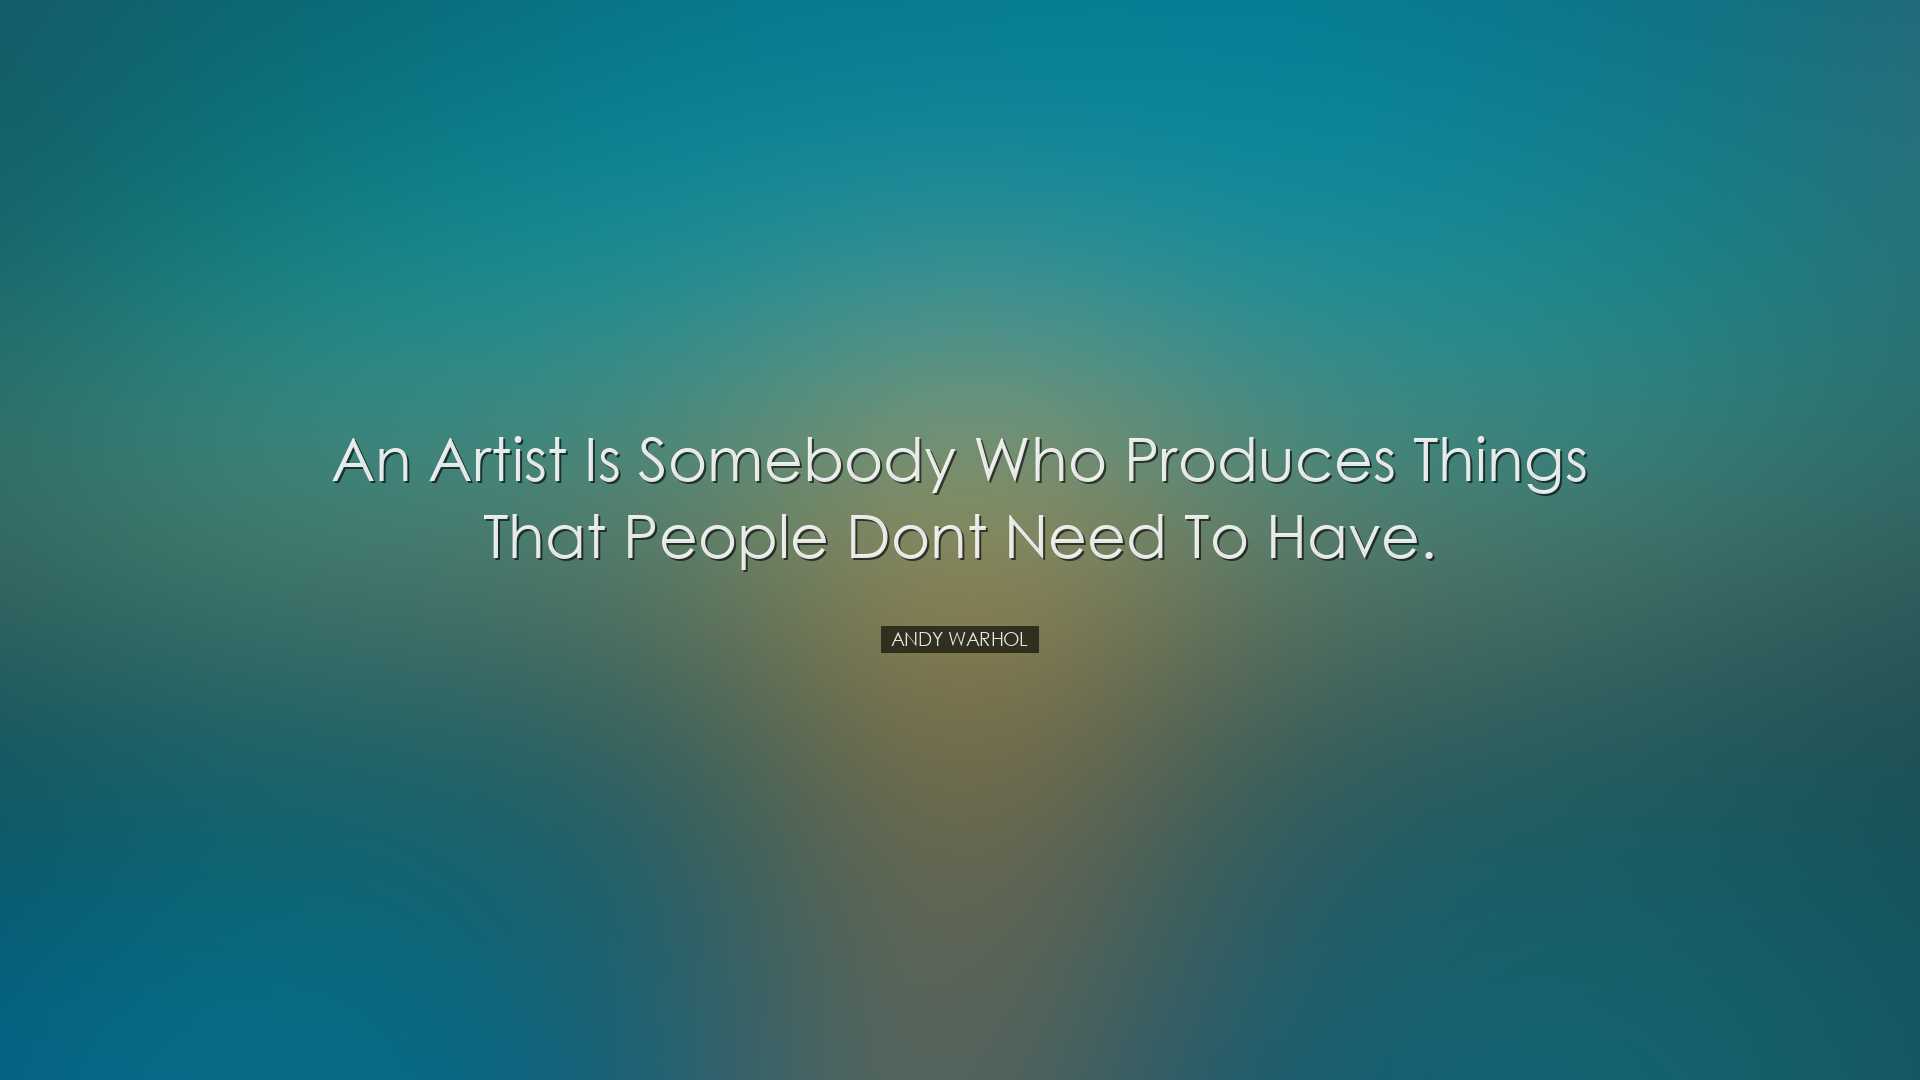 An artist is somebody who produces things that people dont need to